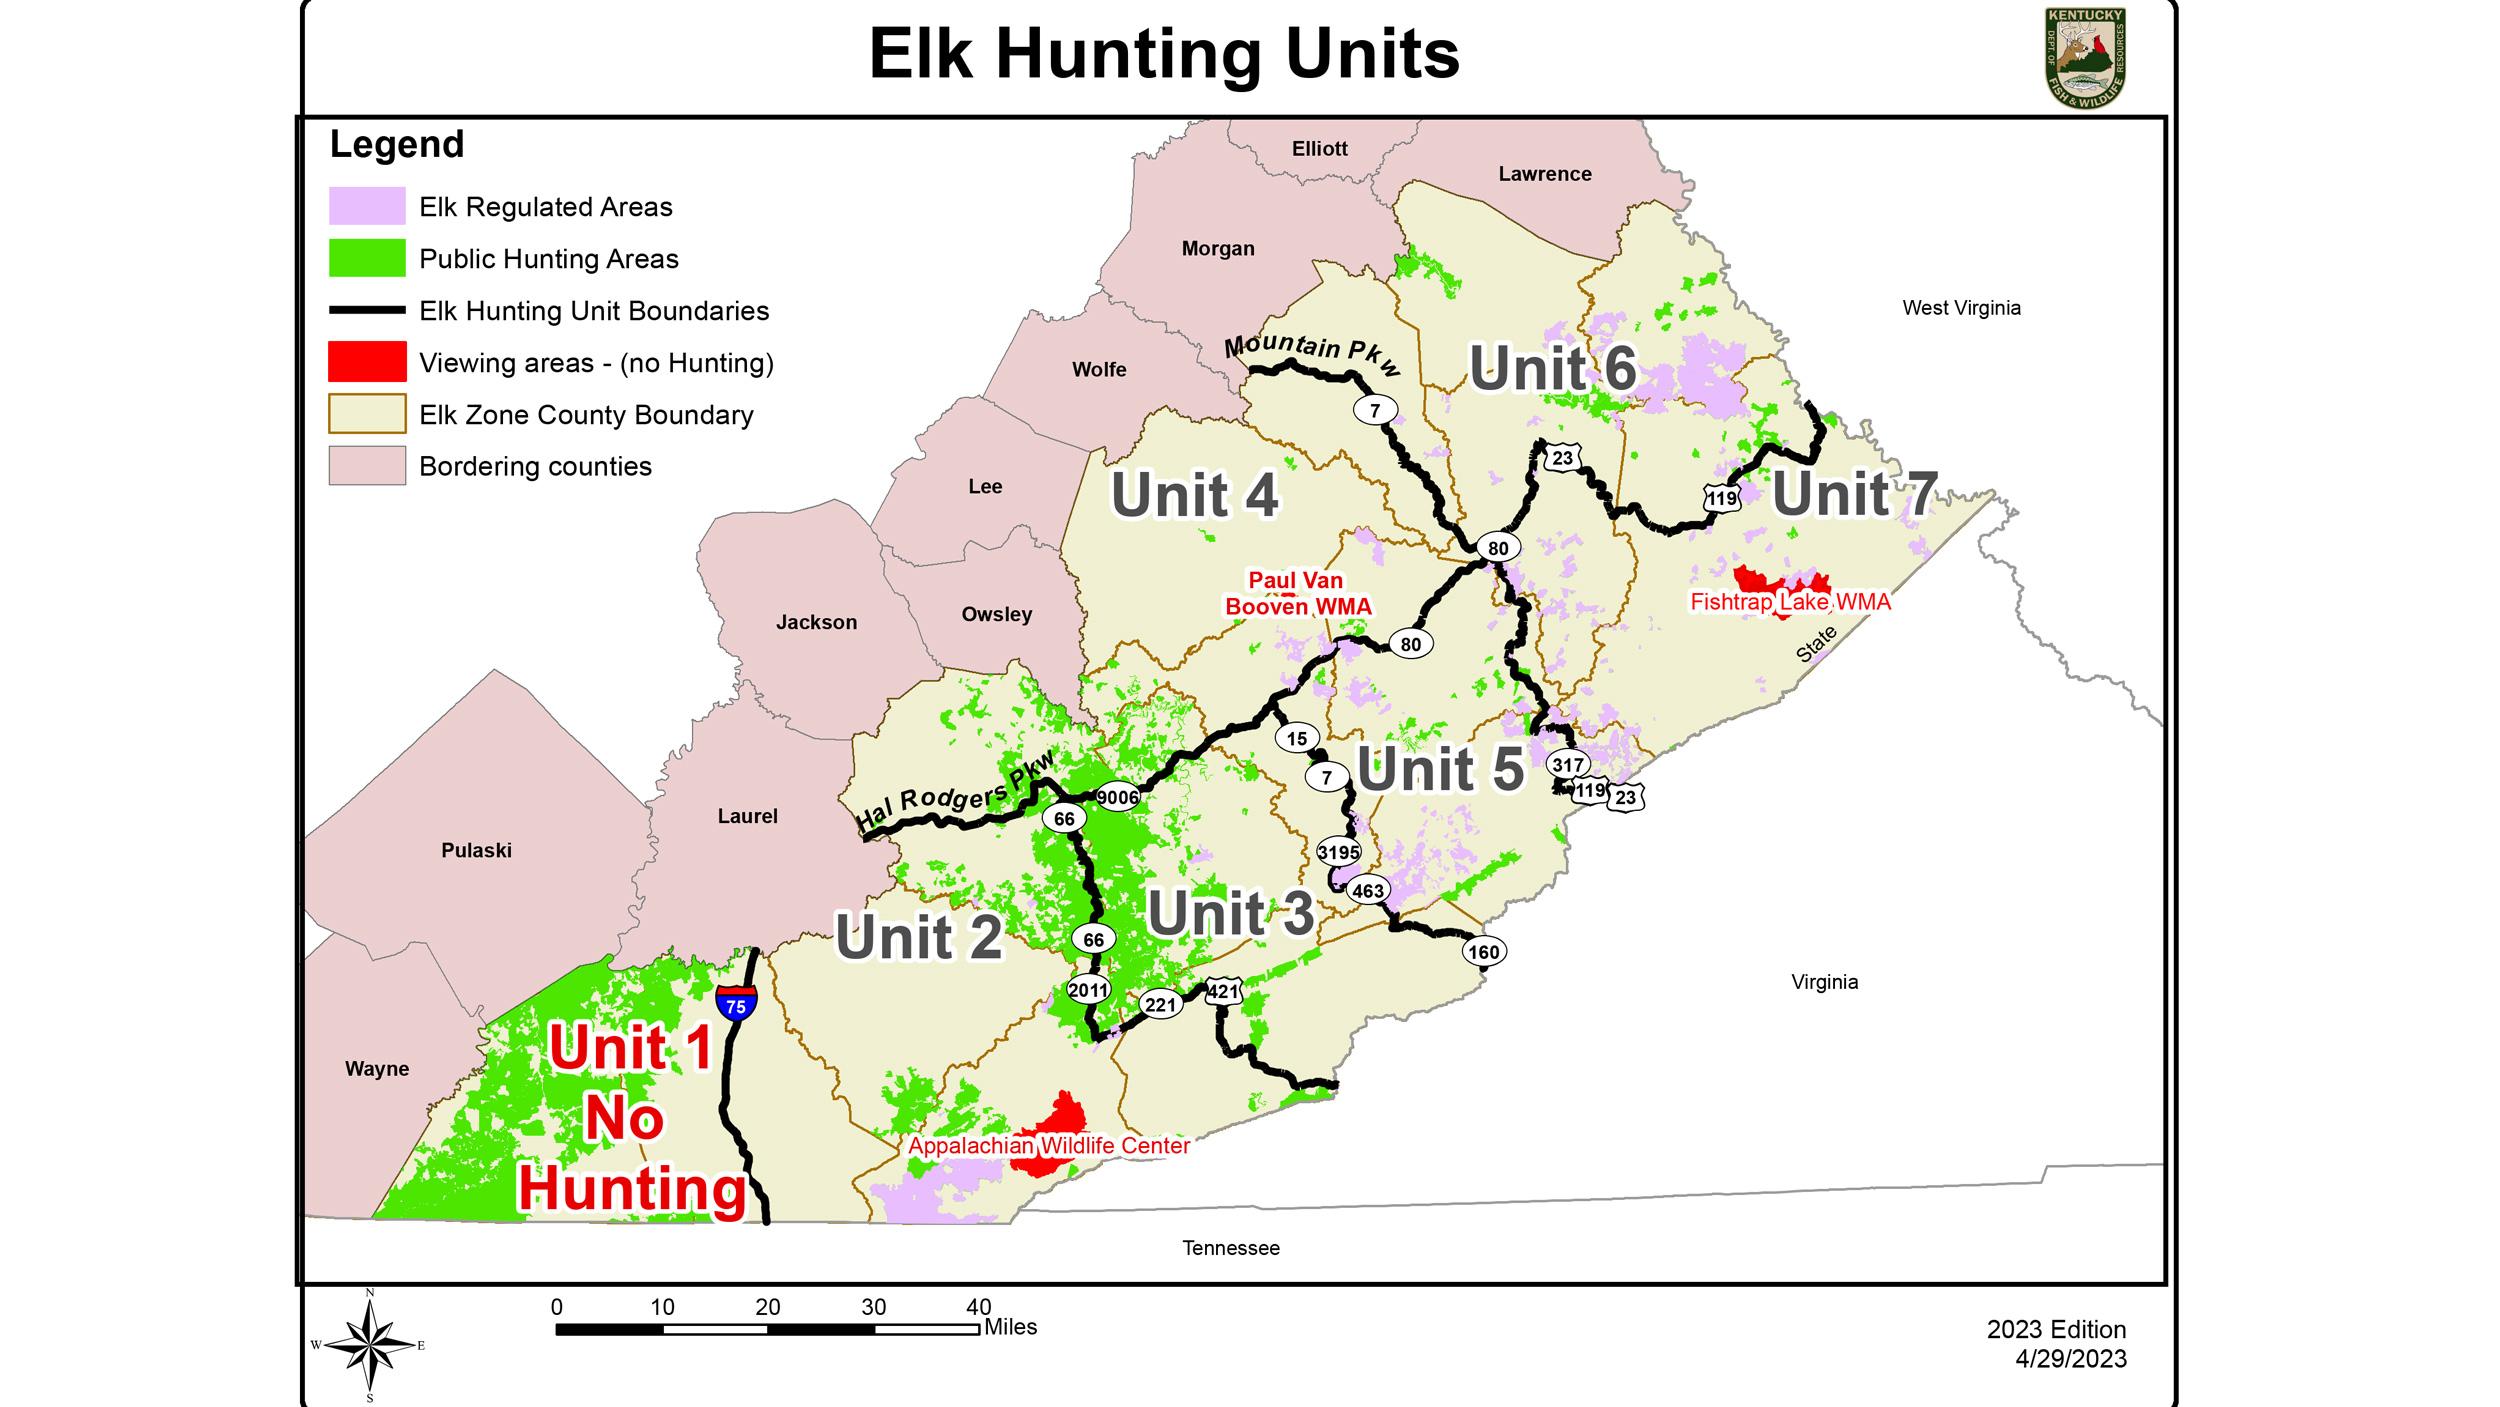 Updated Kentucky elk hunting unit map